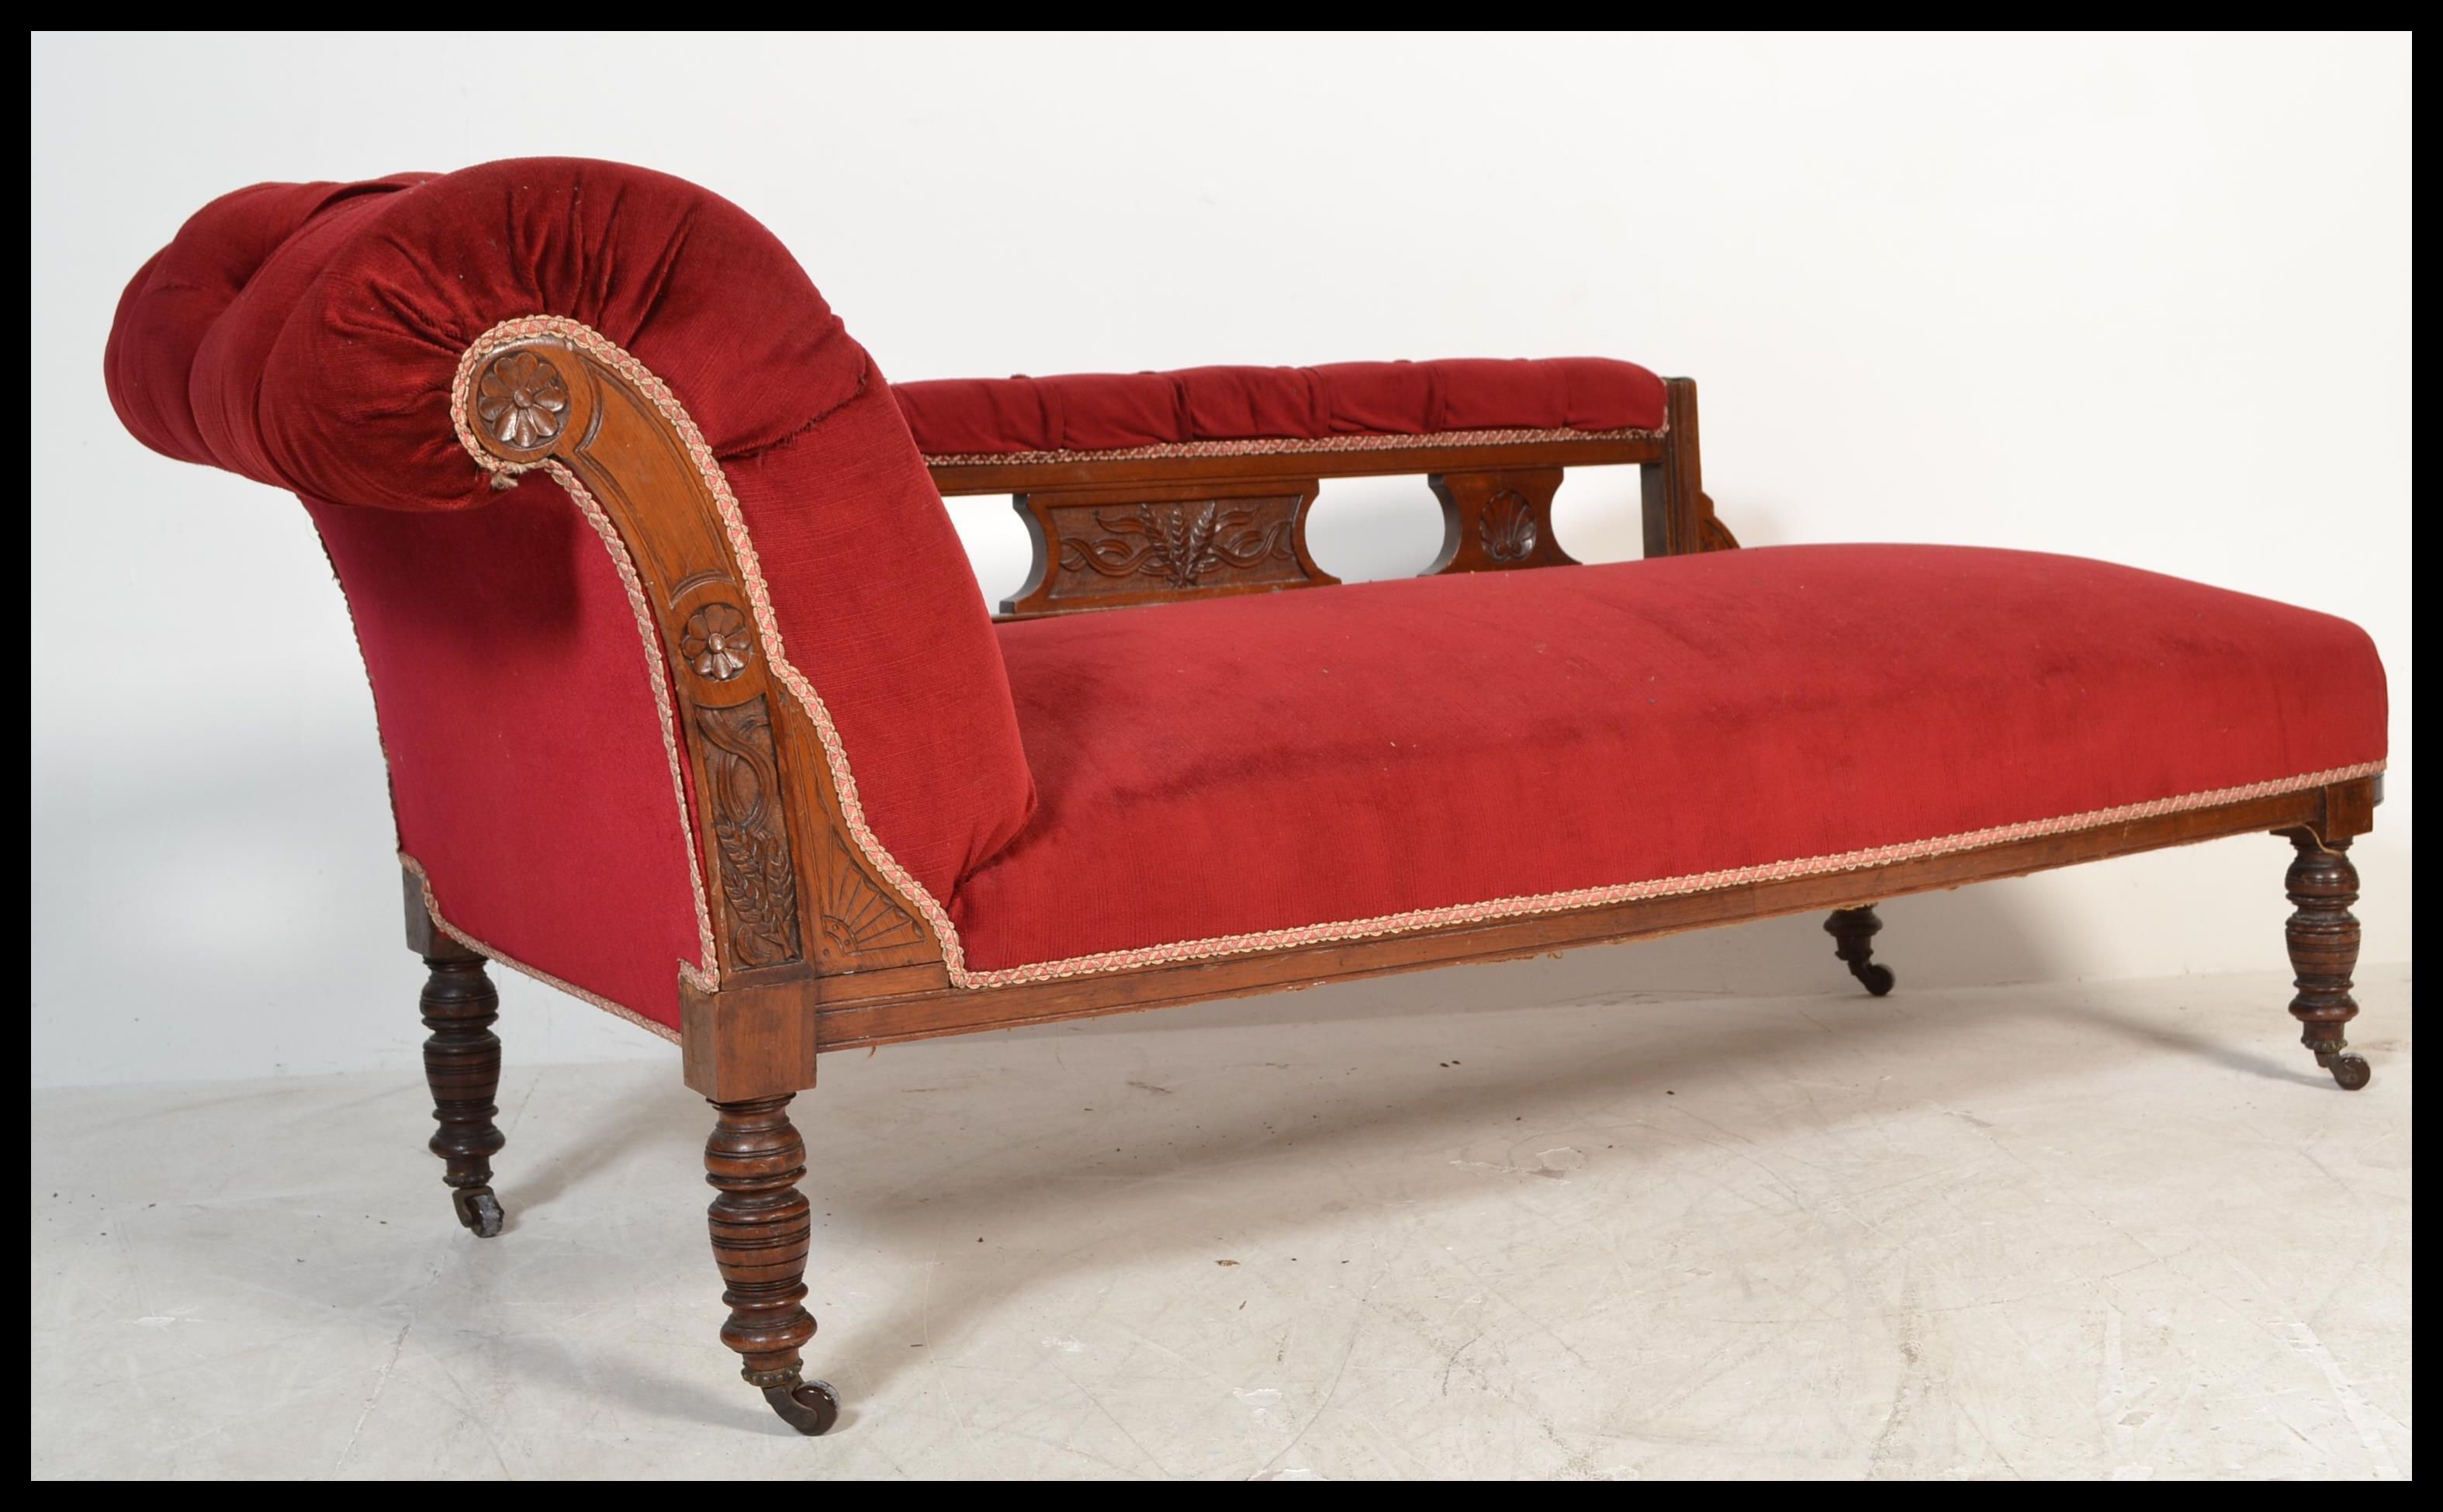 An early 20th Century Edwardian chaise lounge with upholstered button back seat, scrolled back and